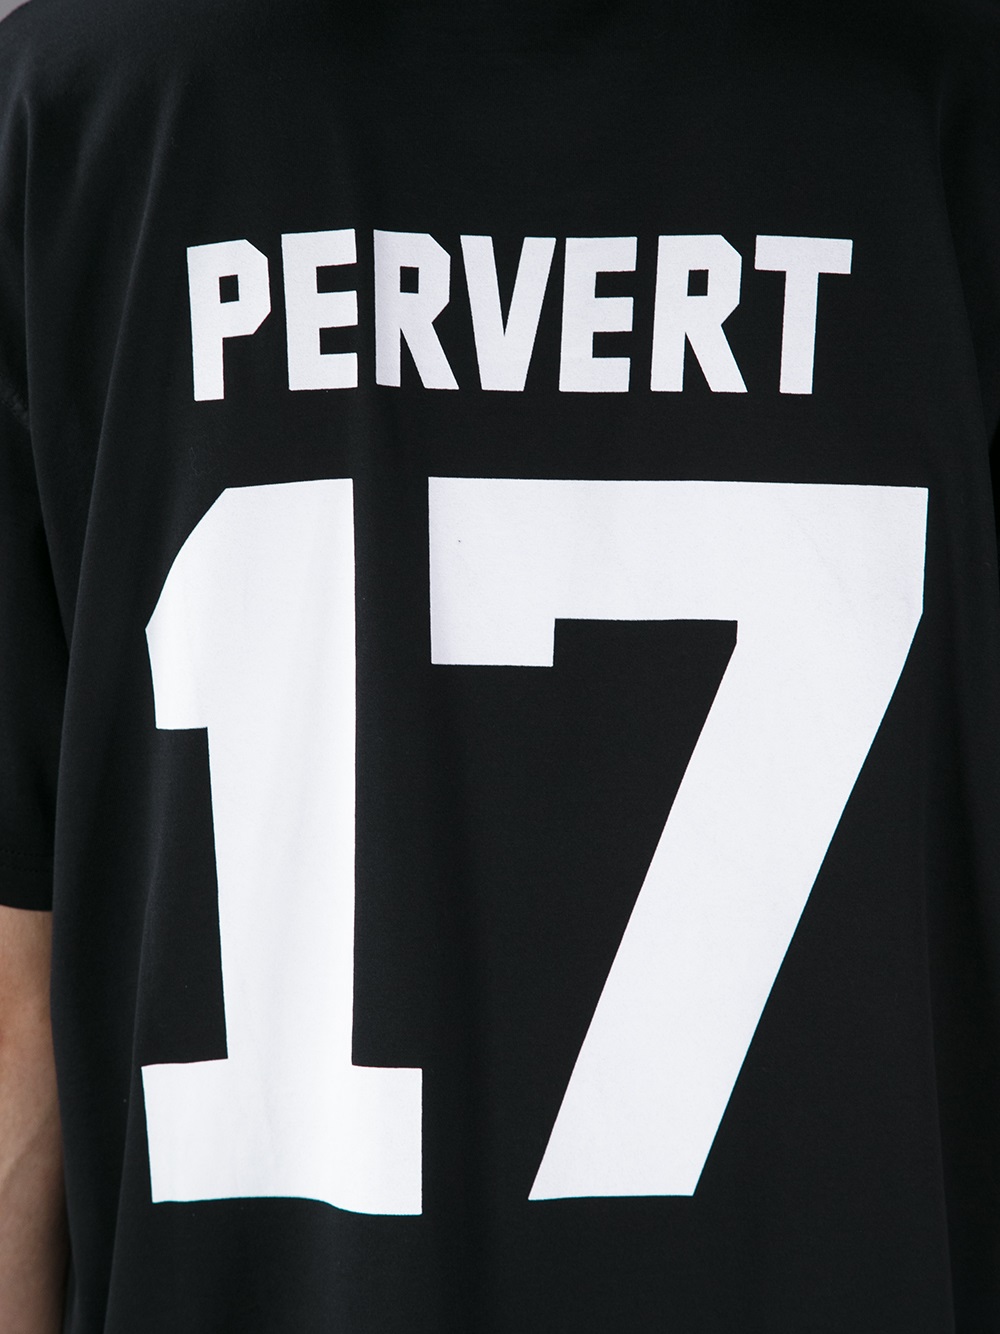 Lyst - Givenchy Pervert 17 Cotton T-Shirt in Black for Men